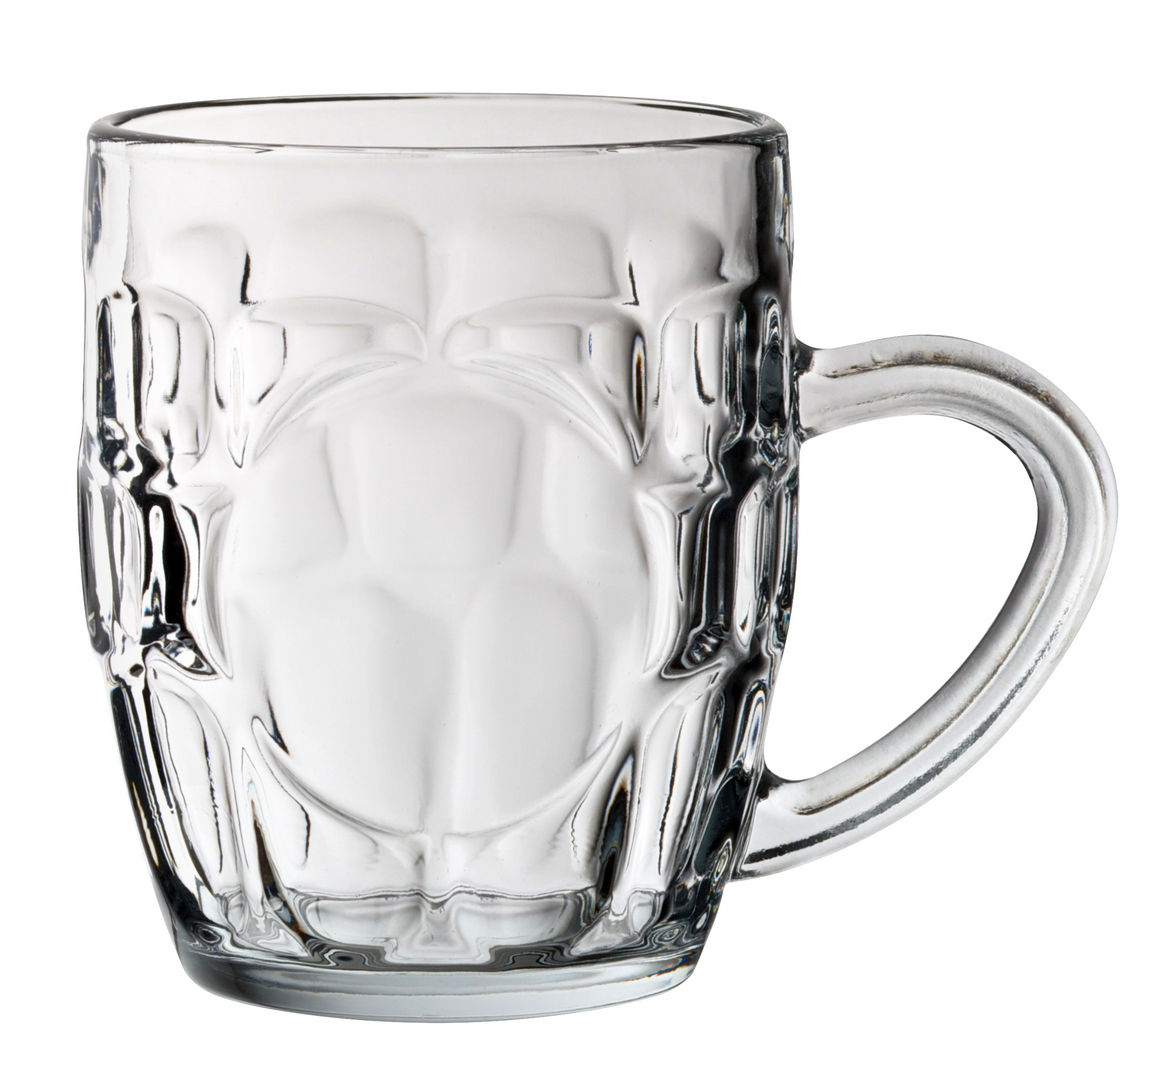 Dimple Tankard Panelled 10oz (29cl) - P00013-000000-B01036 (Pack of 36)